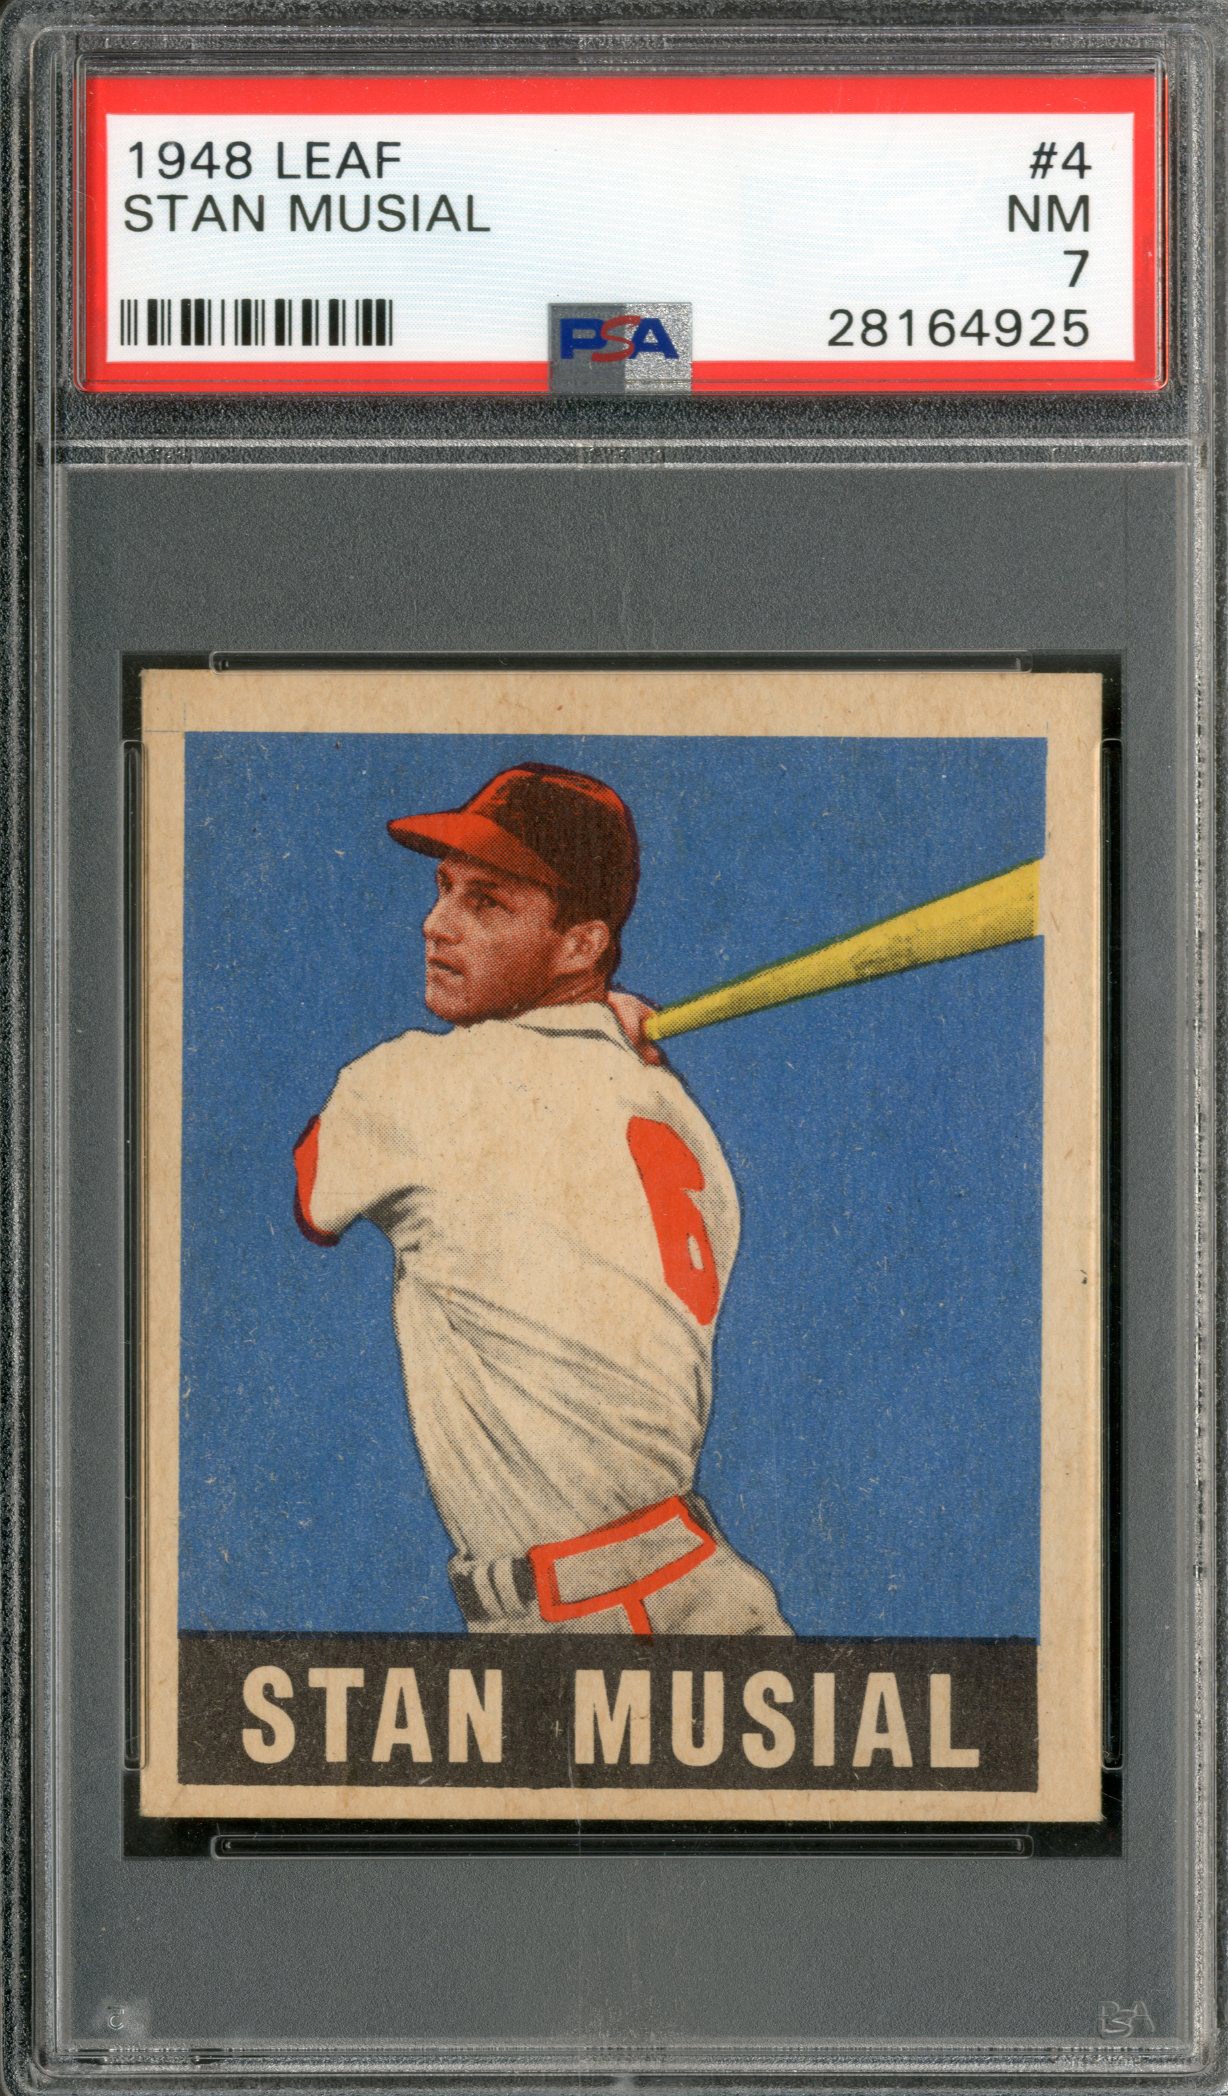 Baseball and Trading Cards - 1948 Leaf #4 Stan Musial - PSA NM 7